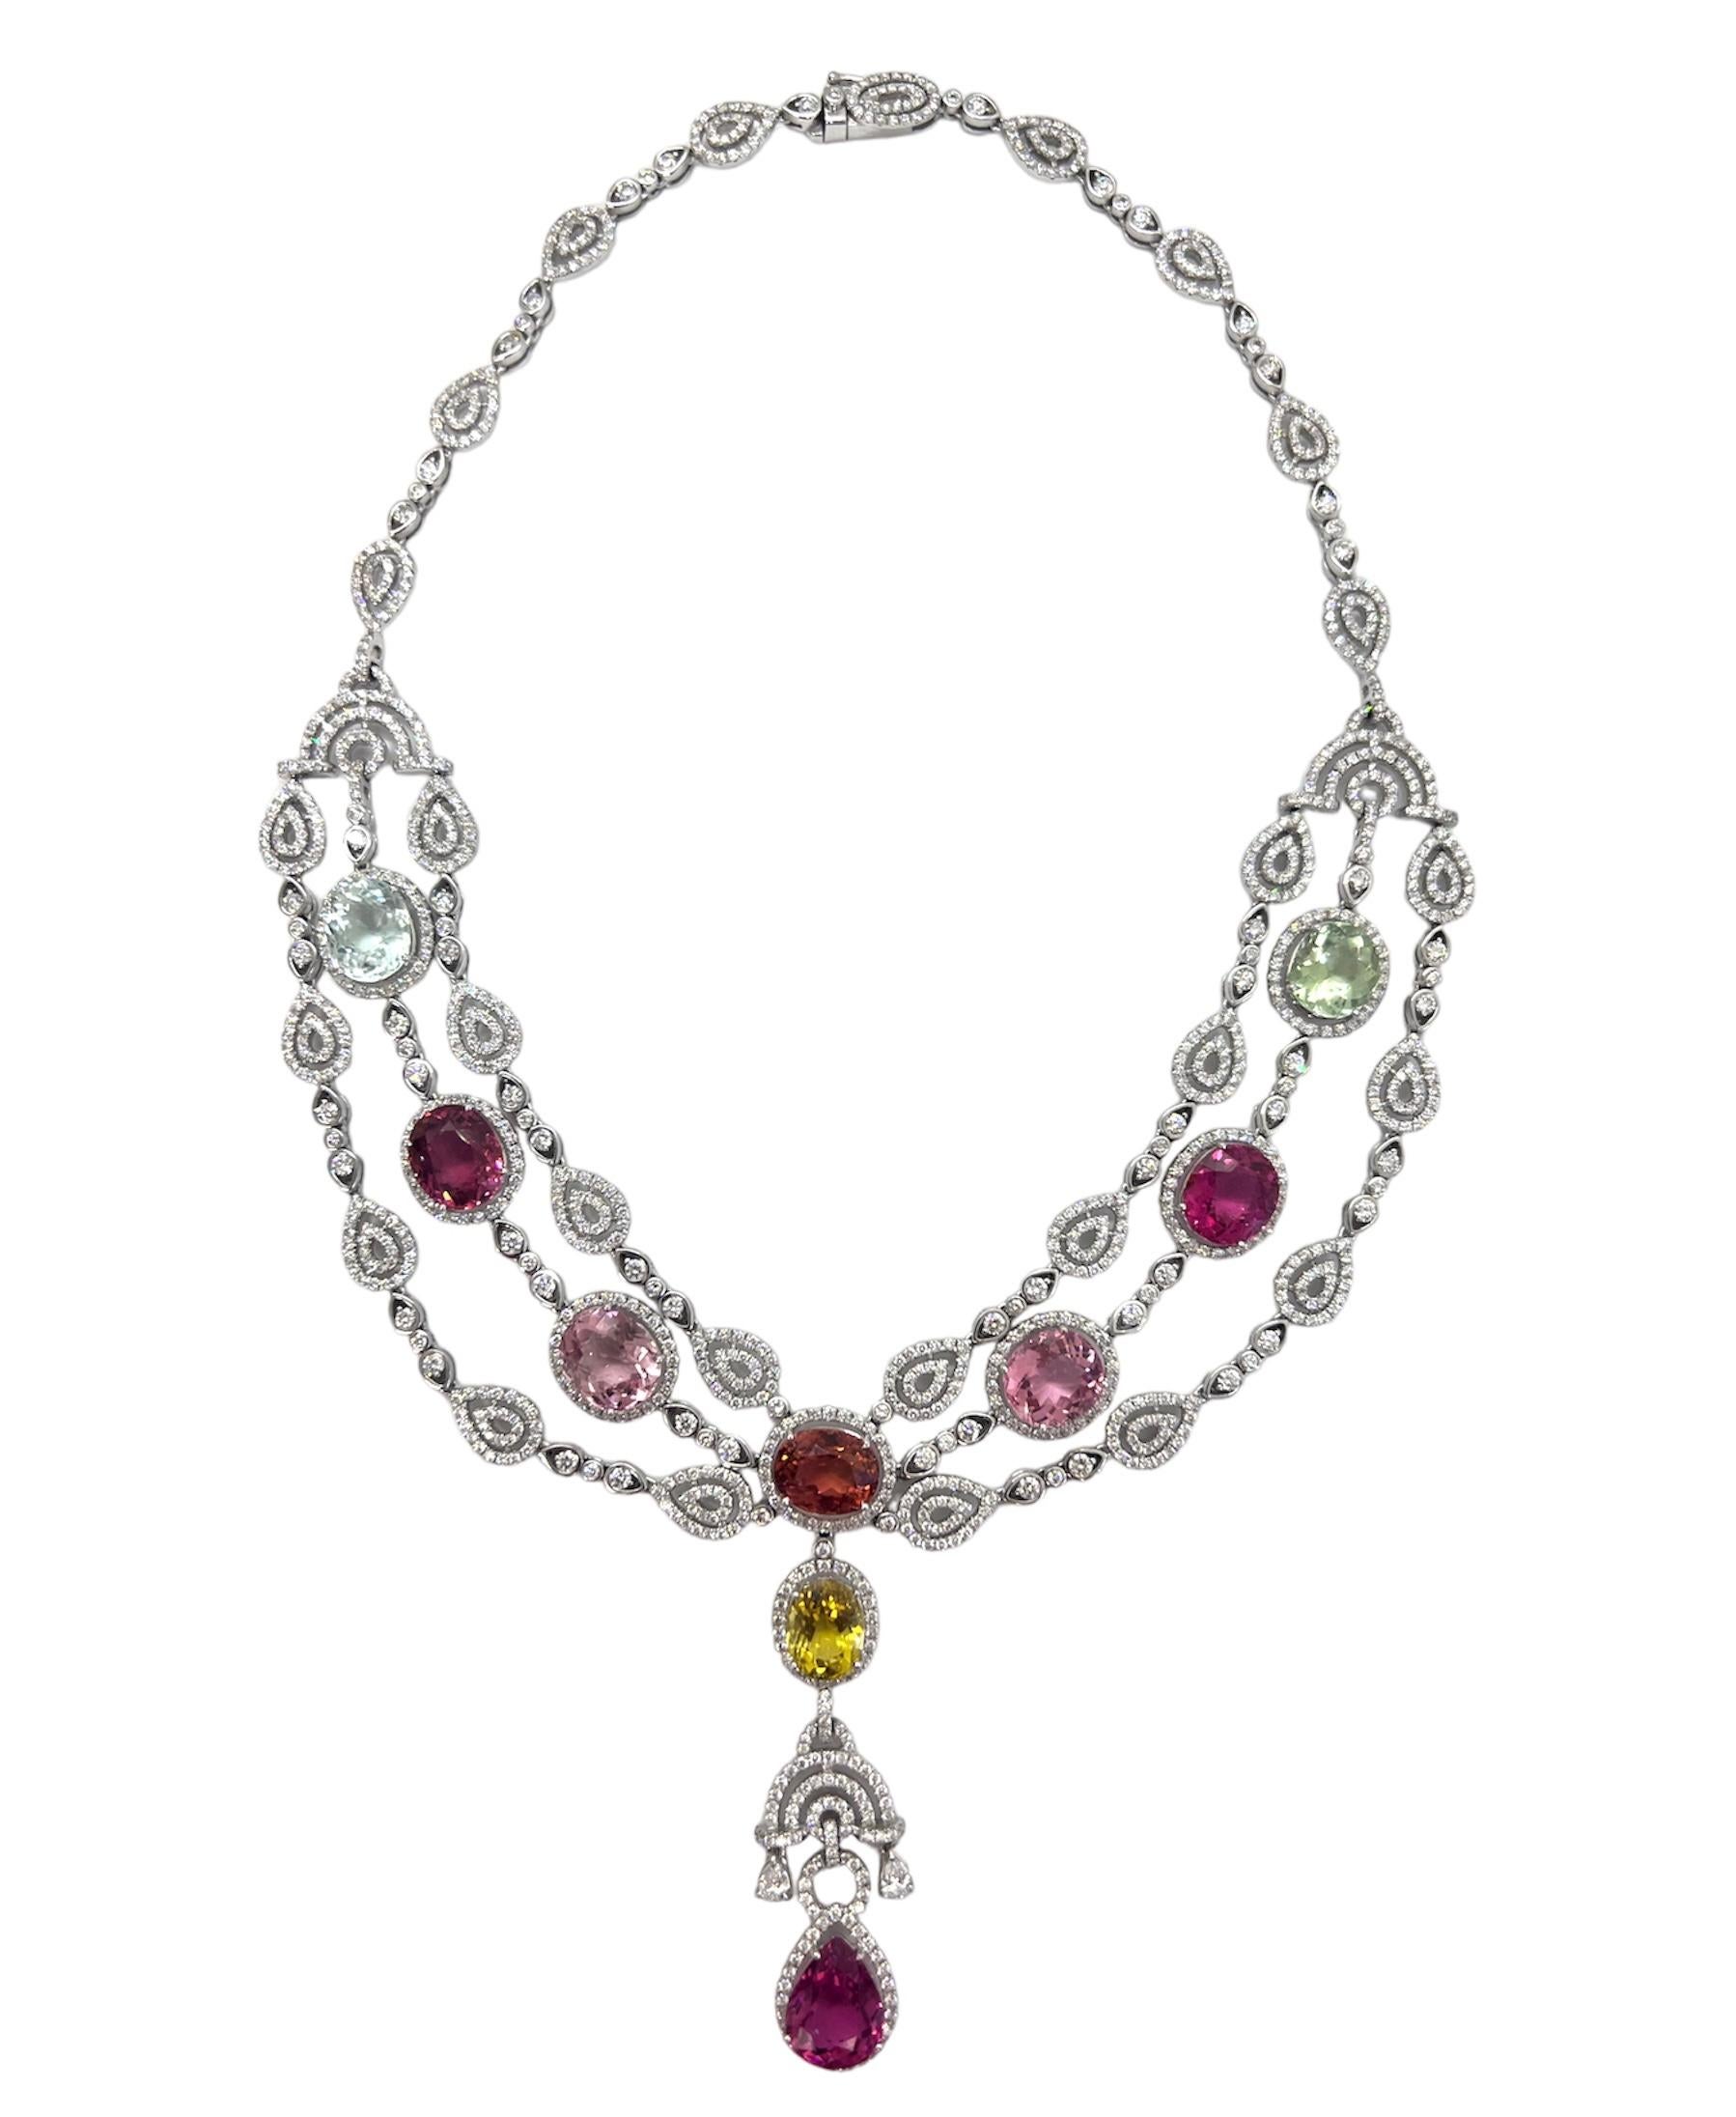 Sophia D. necklace set in white gold features a 16.98 carat diamond and 46.15 carat tourmaline. 

Sophia D by Joseph Dardashti LTD has been known worldwide for 35 years and are inspired by classic Art Deco design that merges with modern